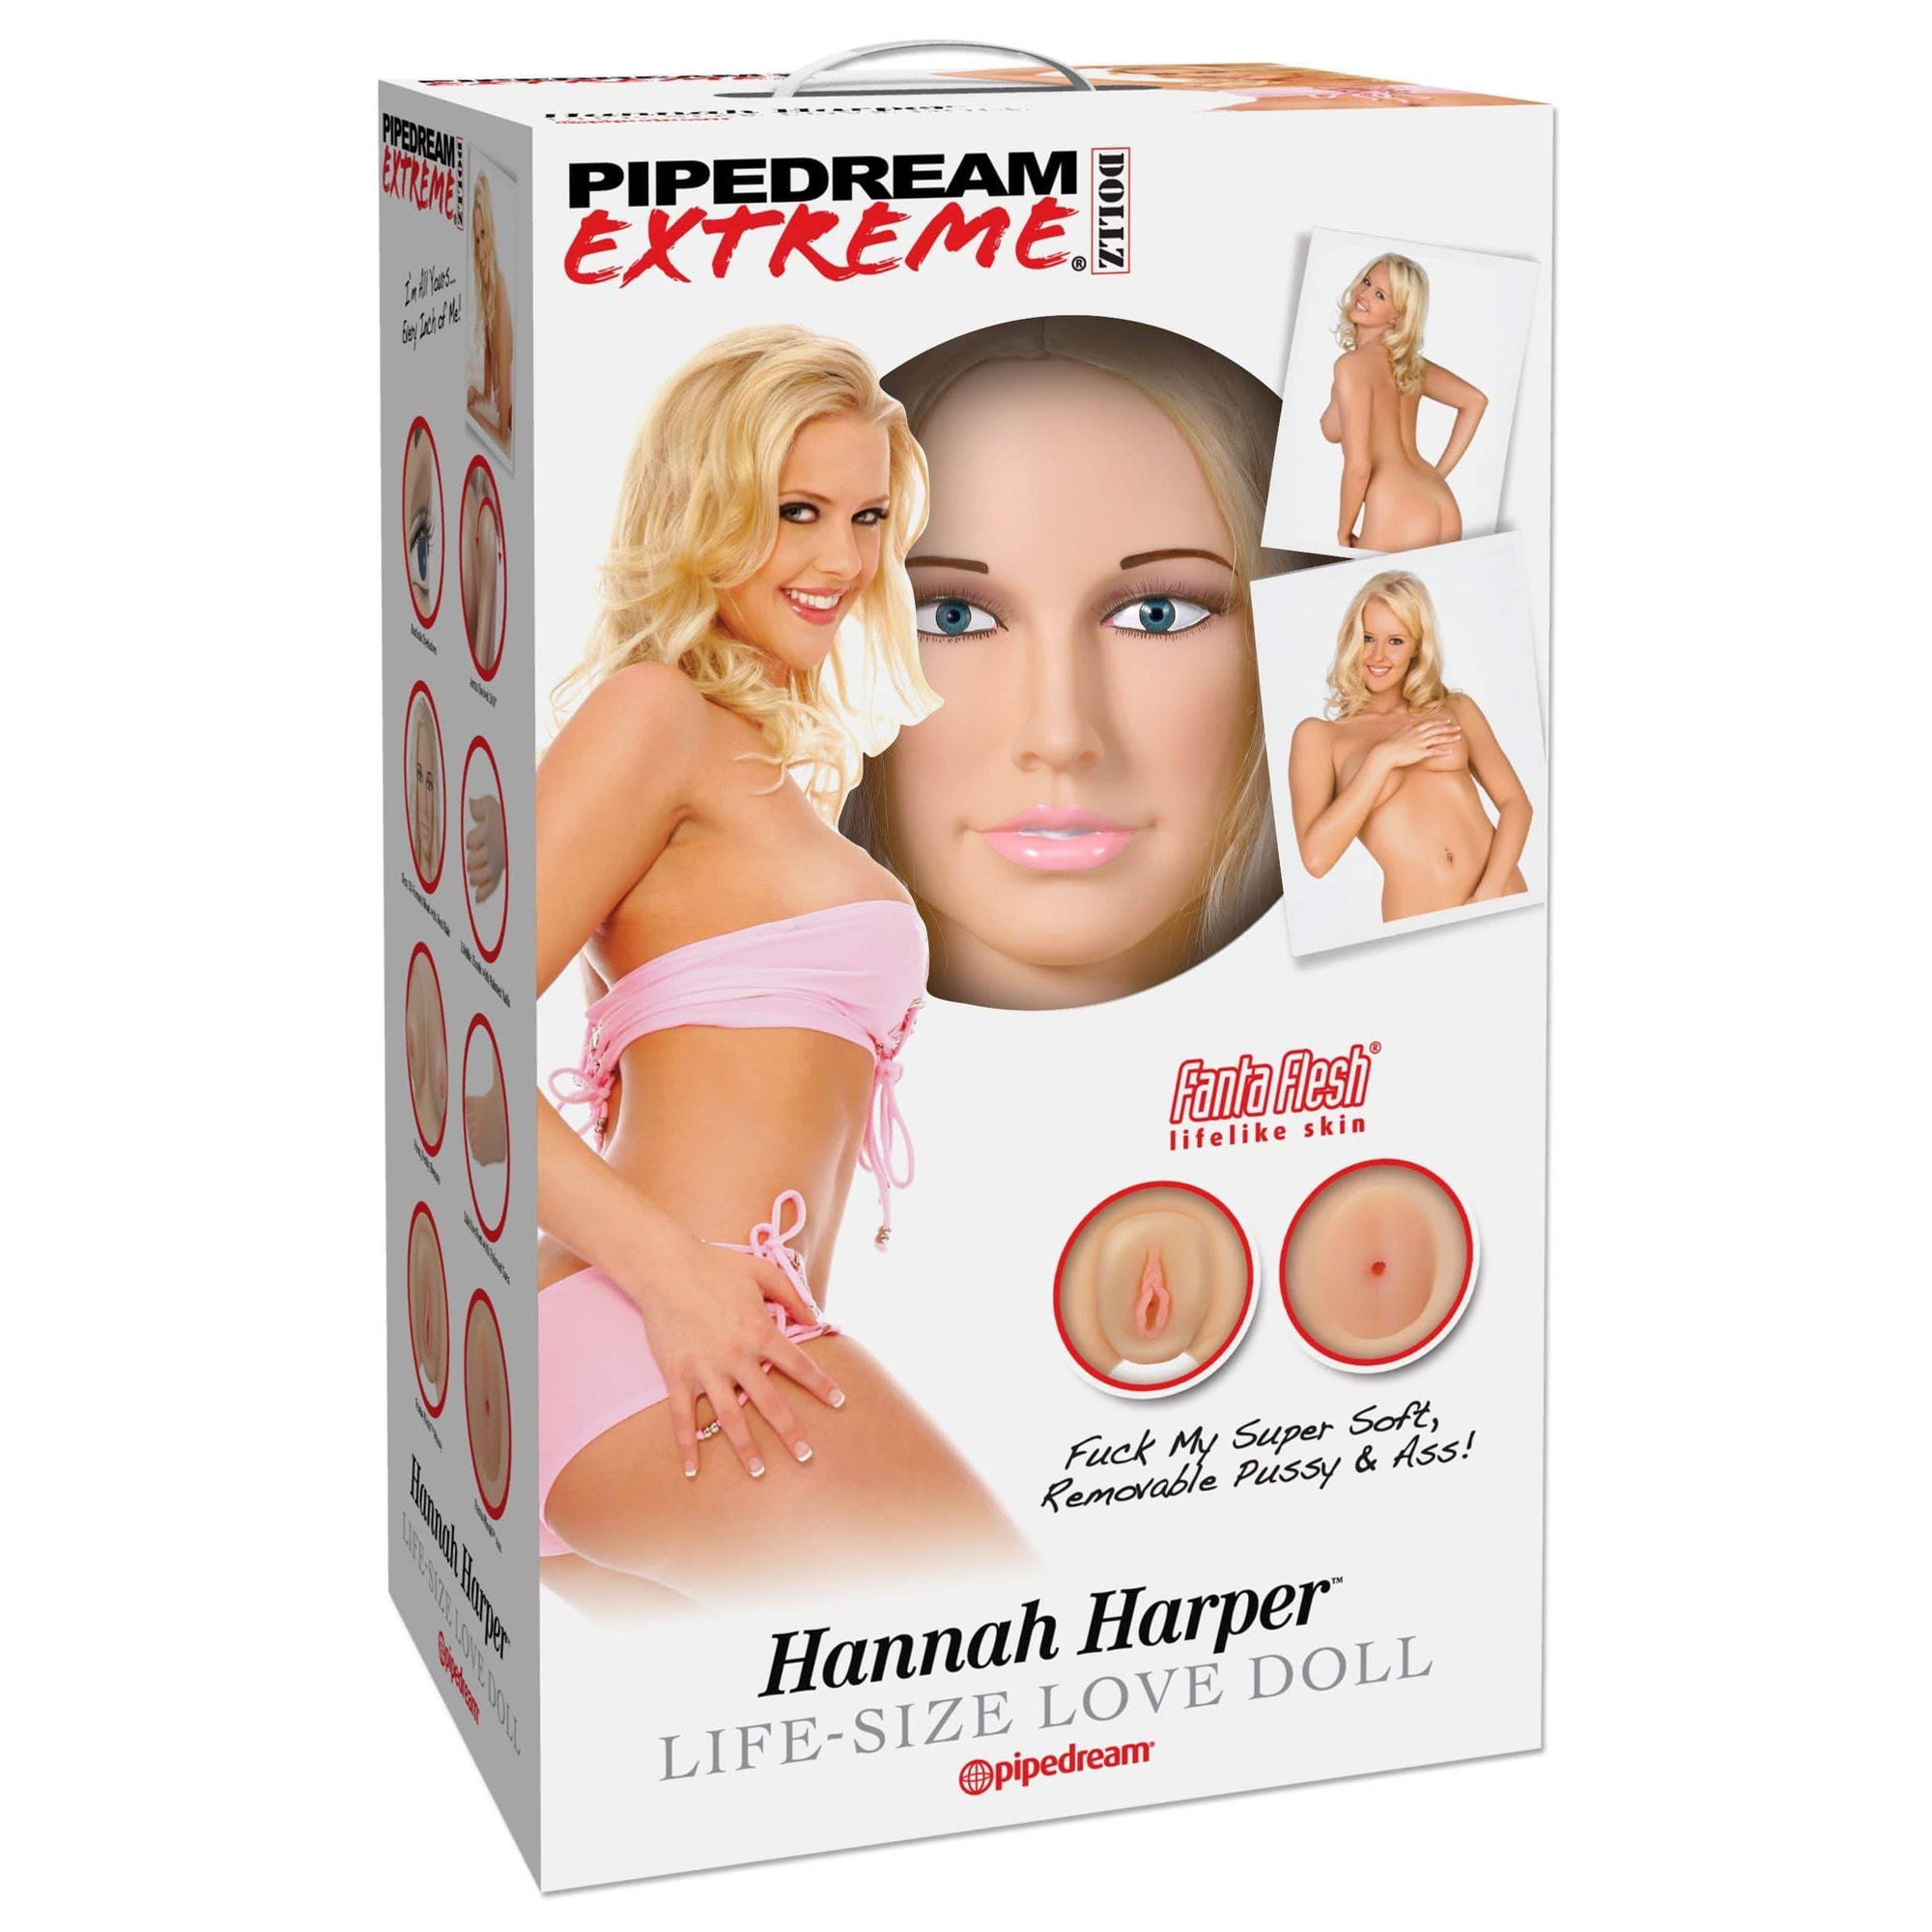 Pipedream - Extreme Dollz Hannah Harper Life Size Love Doll (Beige)